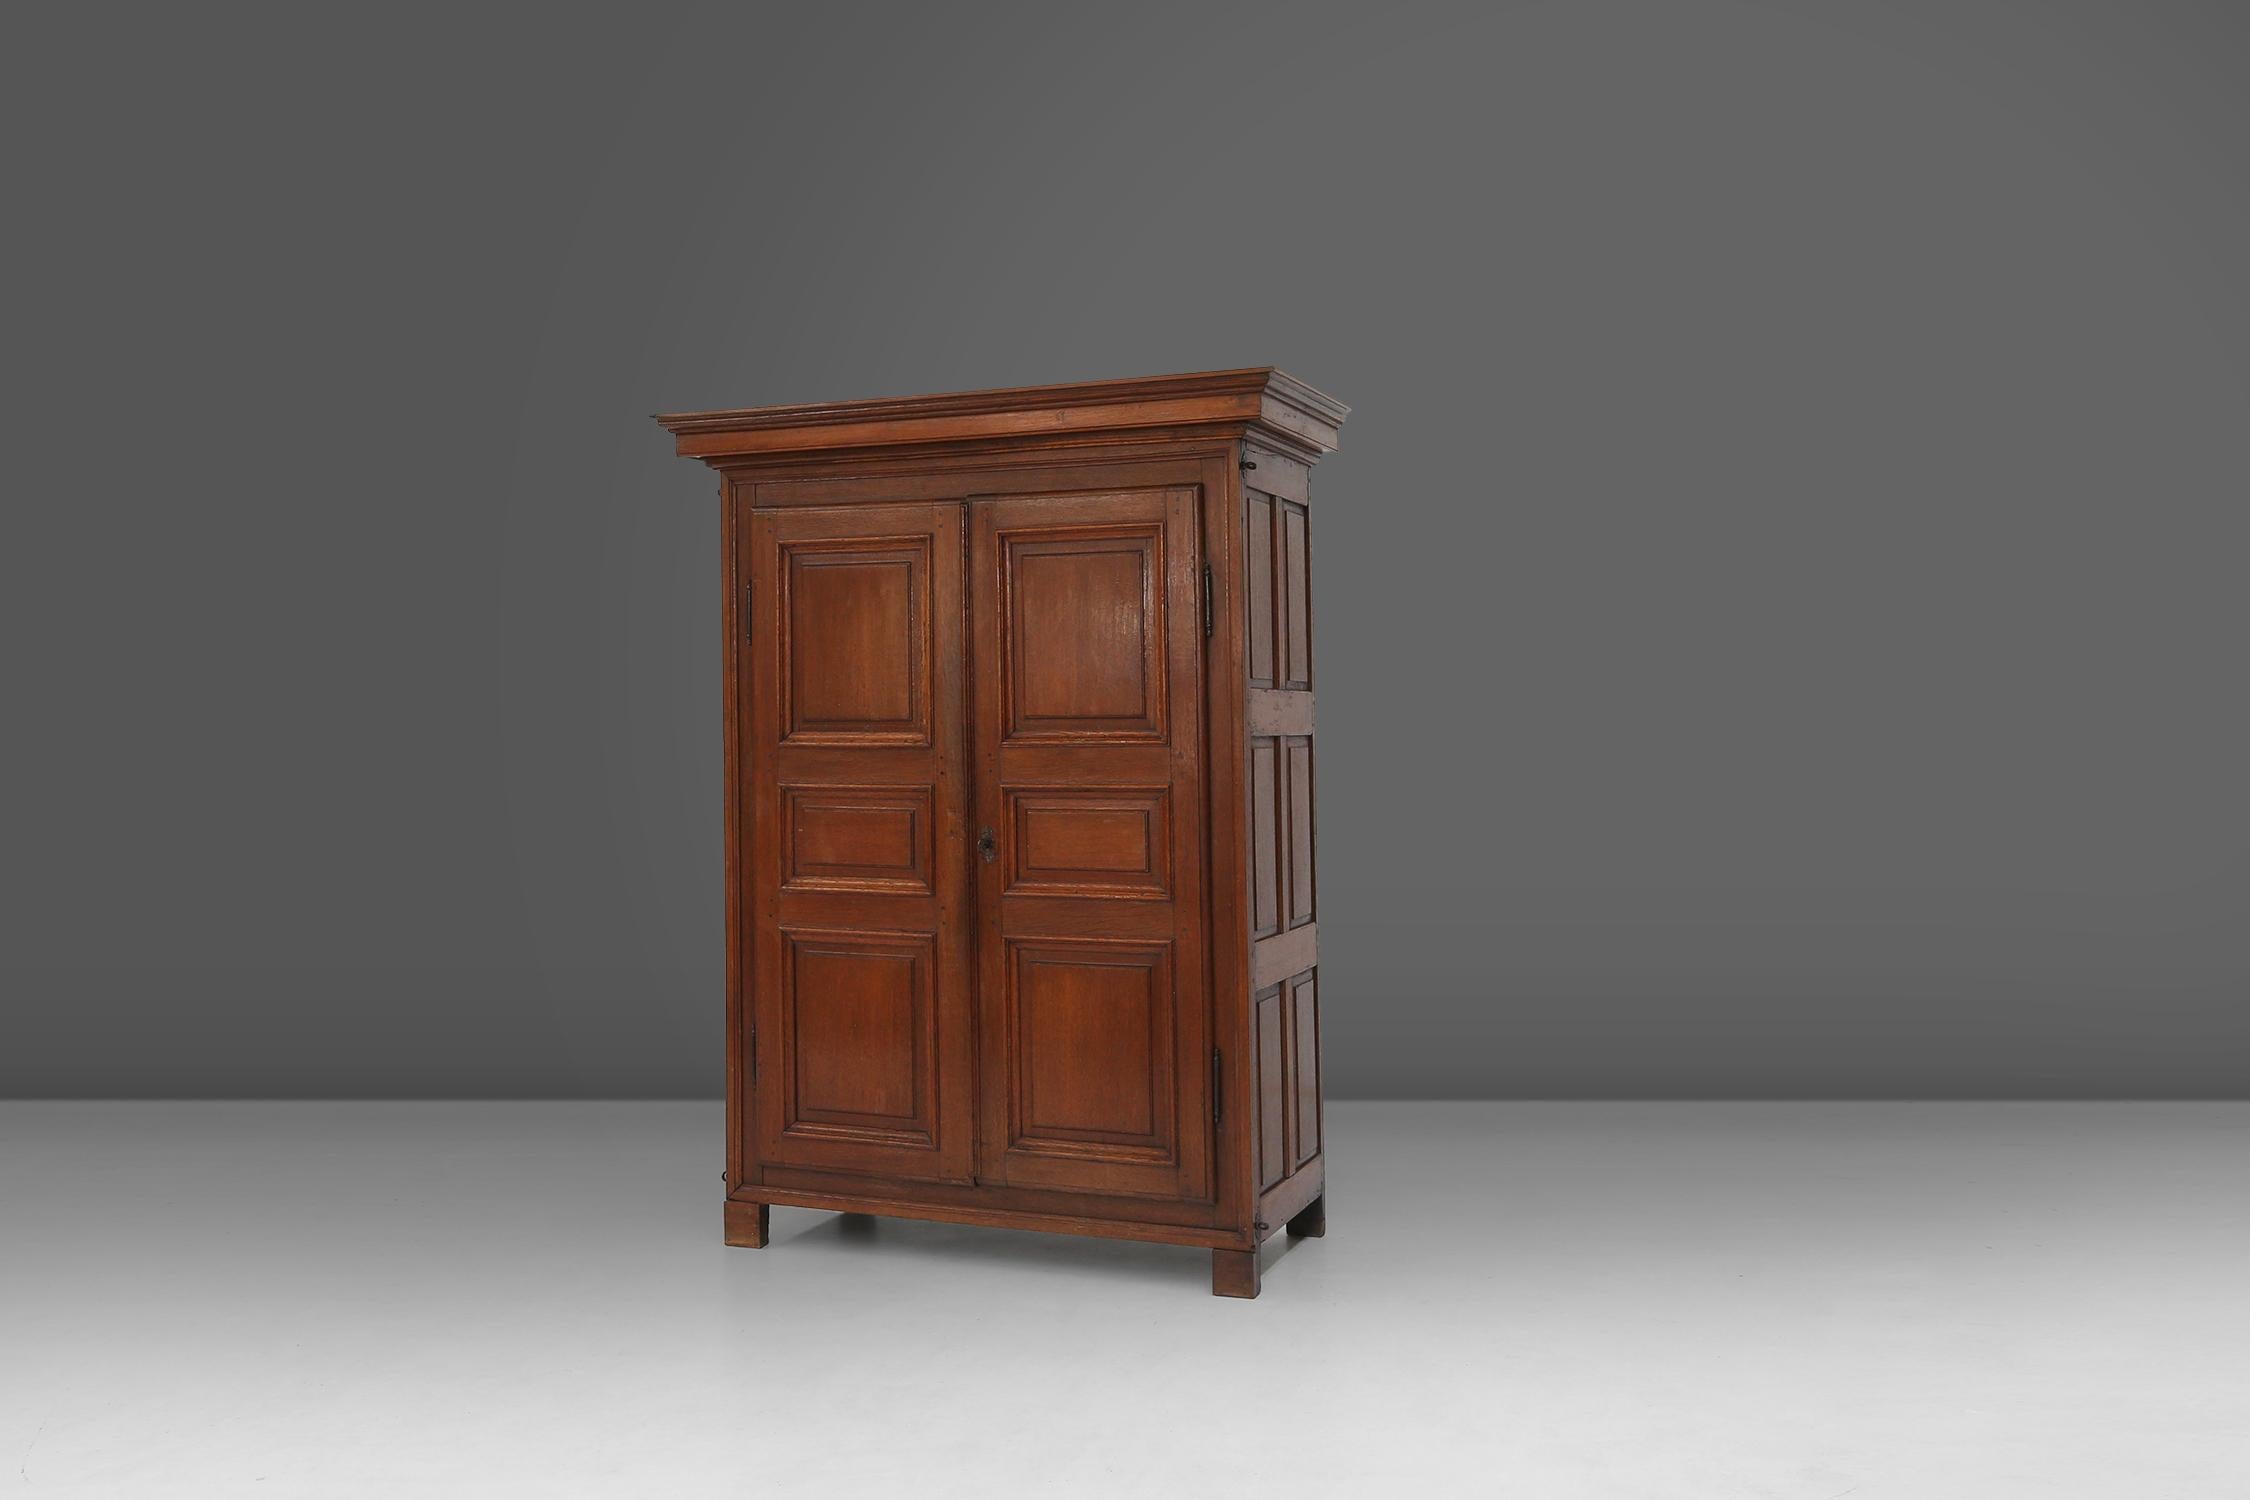 This 18th century wardrobe made of full oak and beautiful example of craftsmanship and tradition. It is assembled using an old technique with screws visible on the outside of the wardrobe. This gives the wardrobe added charm and character.

The